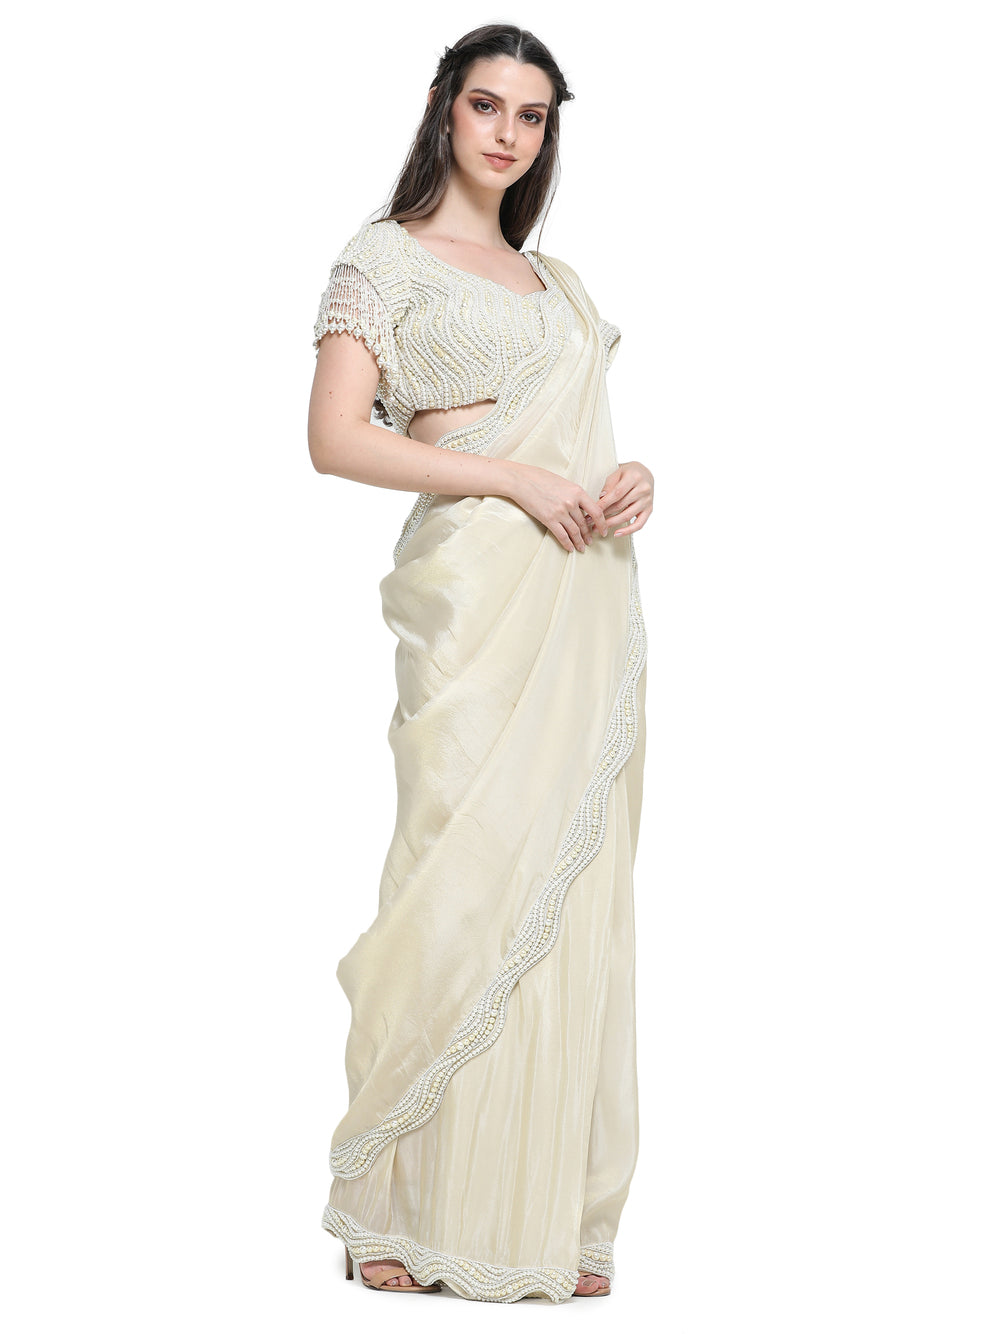 Off white tissue organza sari with pearl work border and embroidered blouse